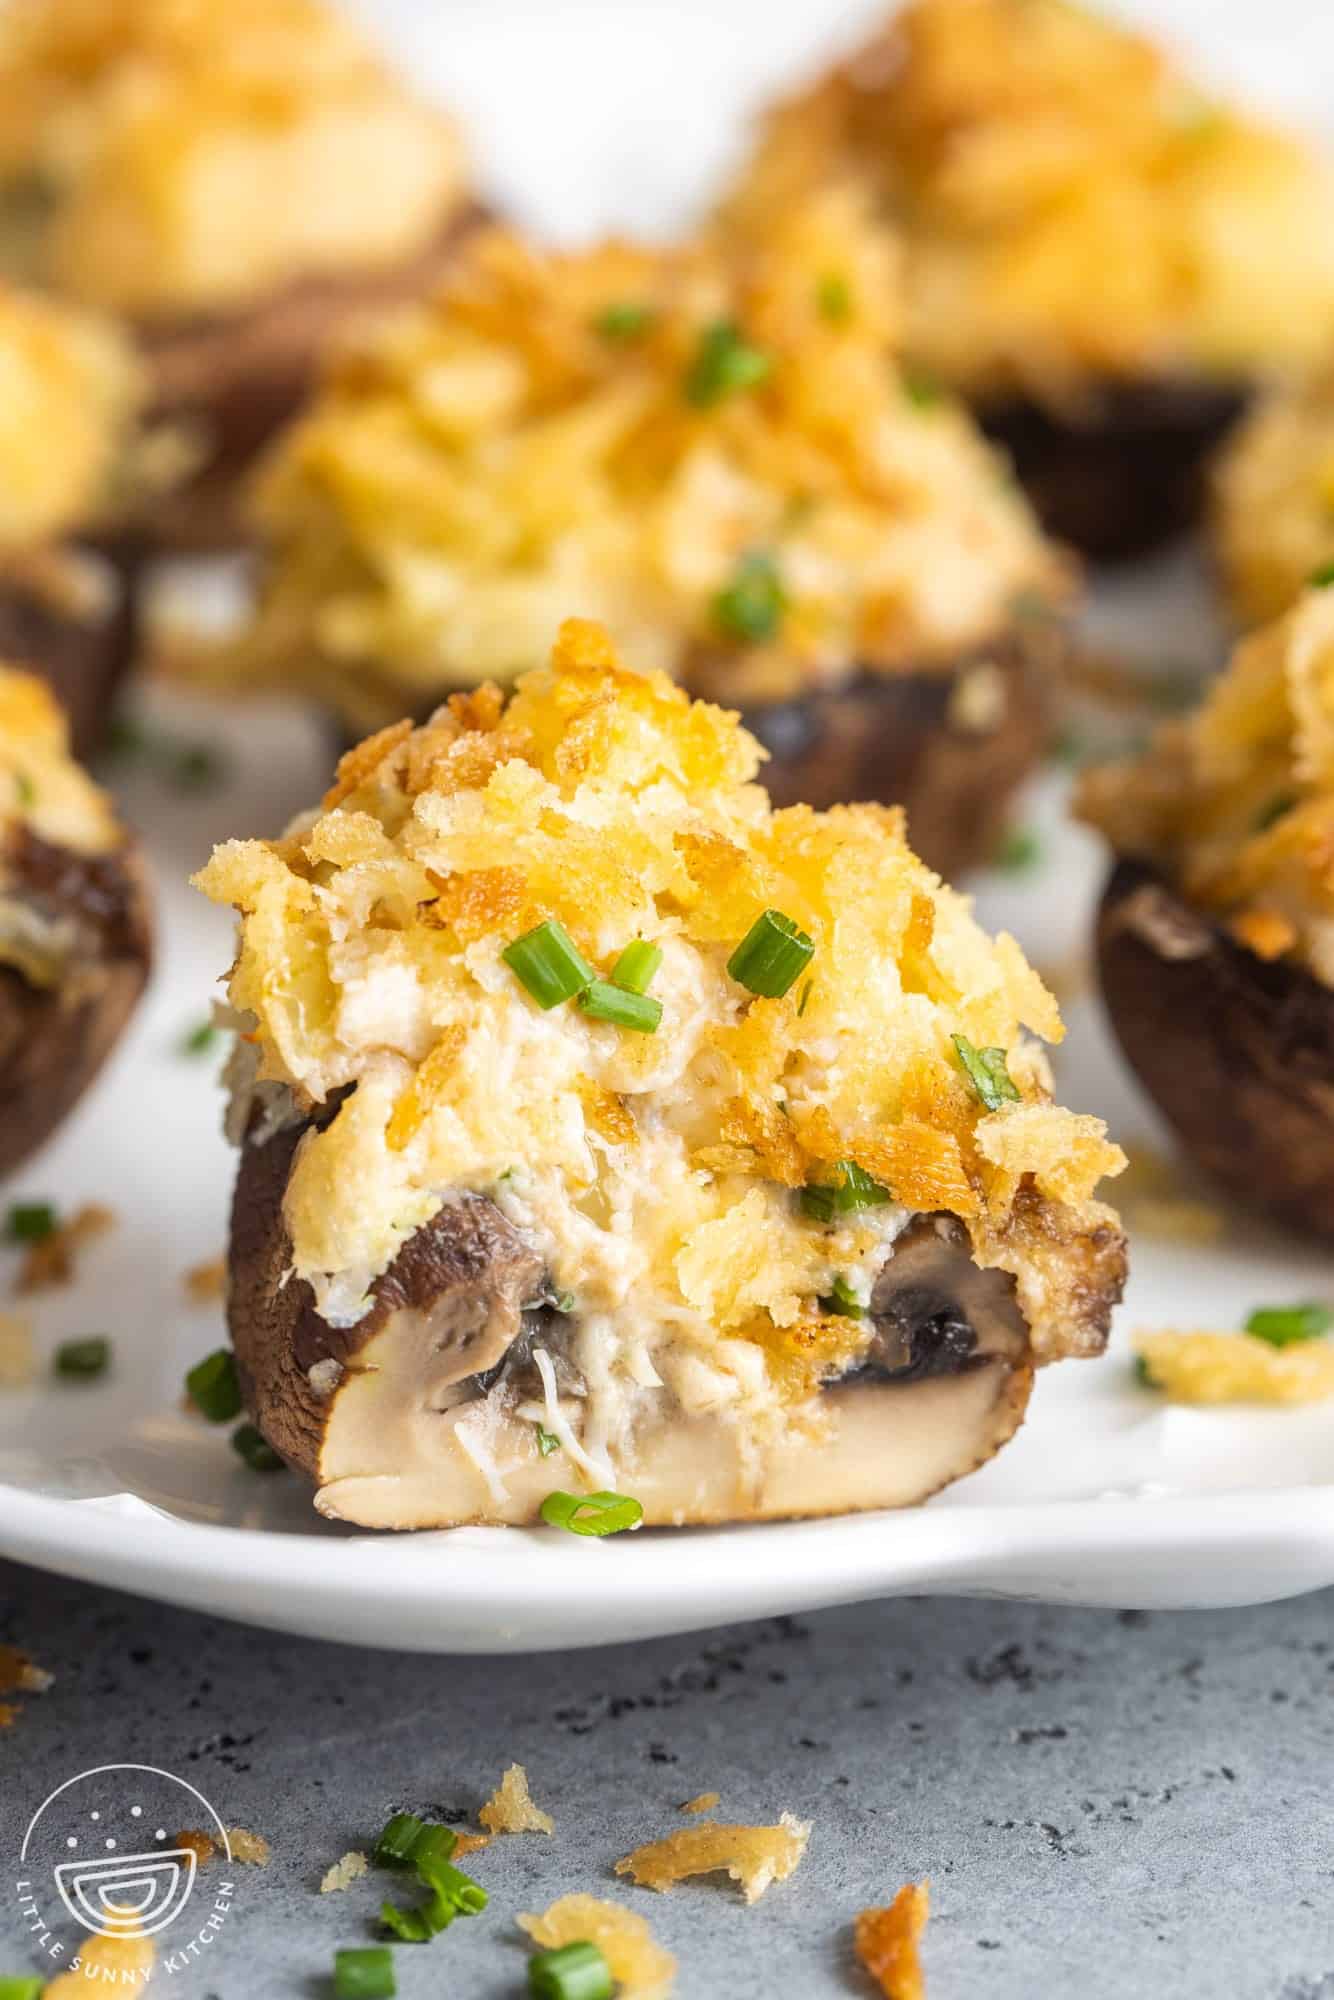 closeup of a crab stuffed mushroom that has been cut in half to show what it looks like inside, gooey and cheesy.